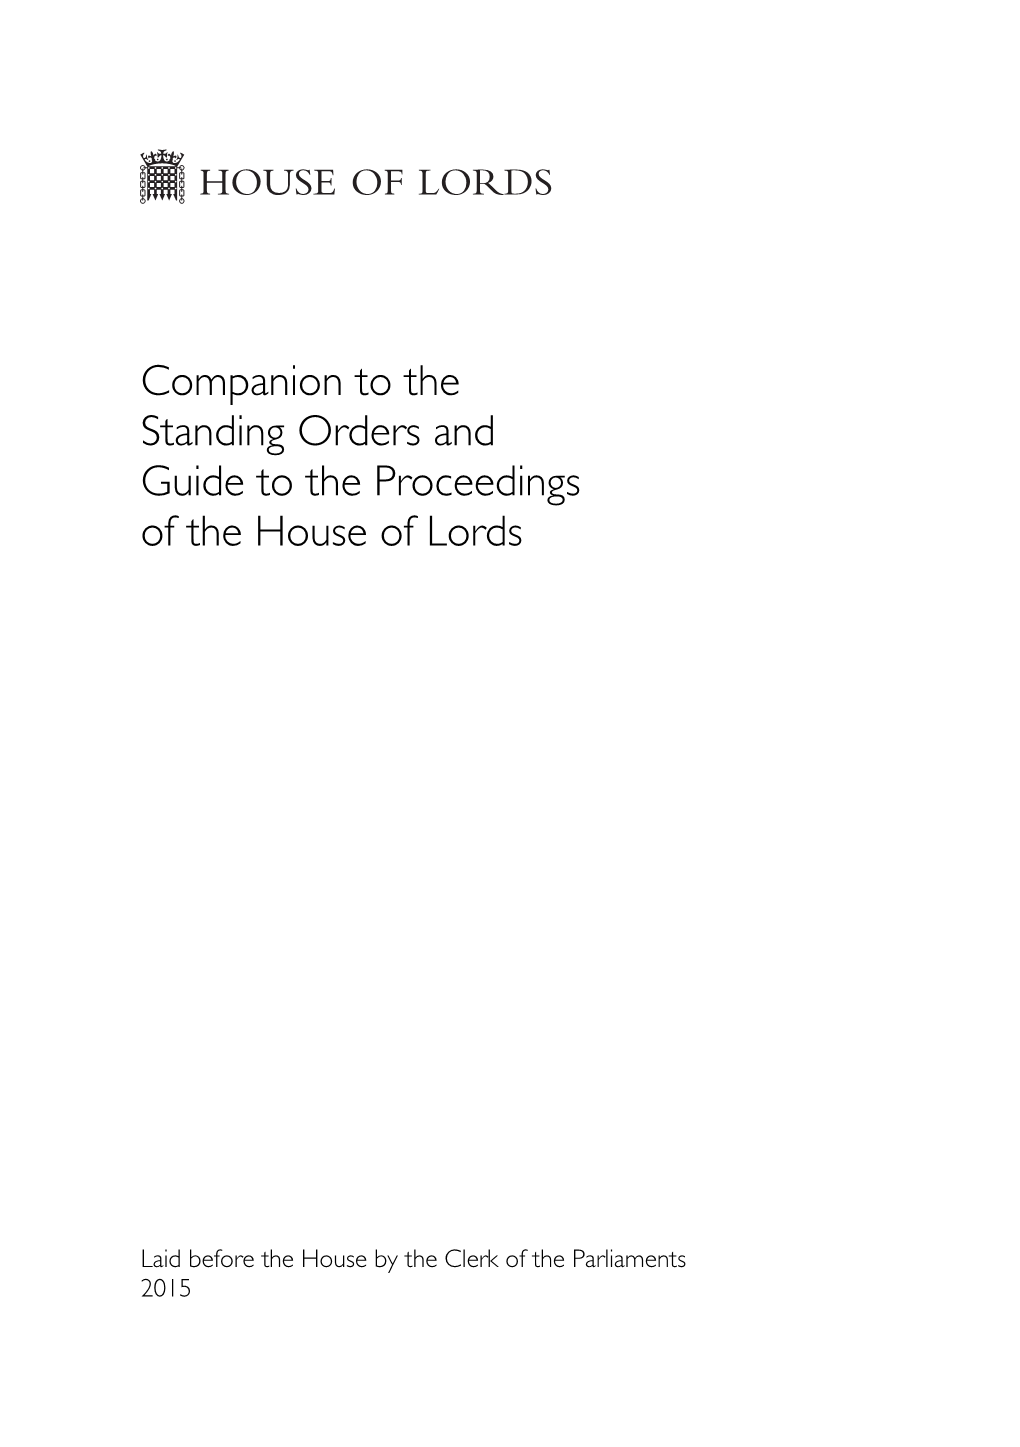 Companion to the Standing Orders 2015